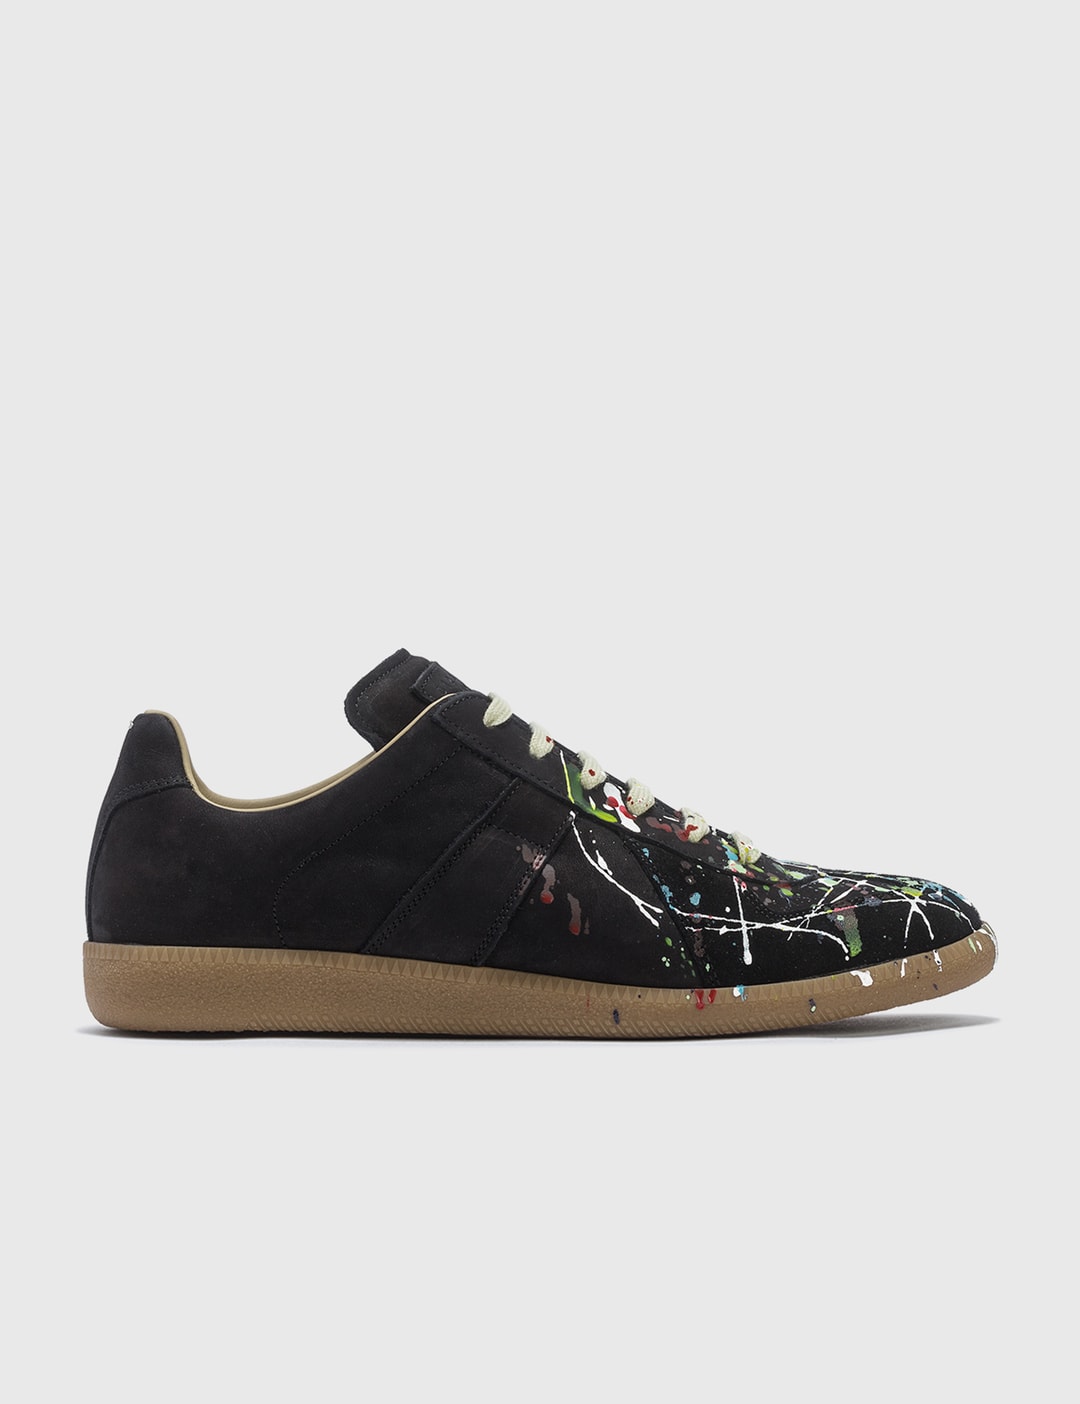 Maison Margiela - Replica Paint Drop Sneakers | HBX - Globally Curated ...